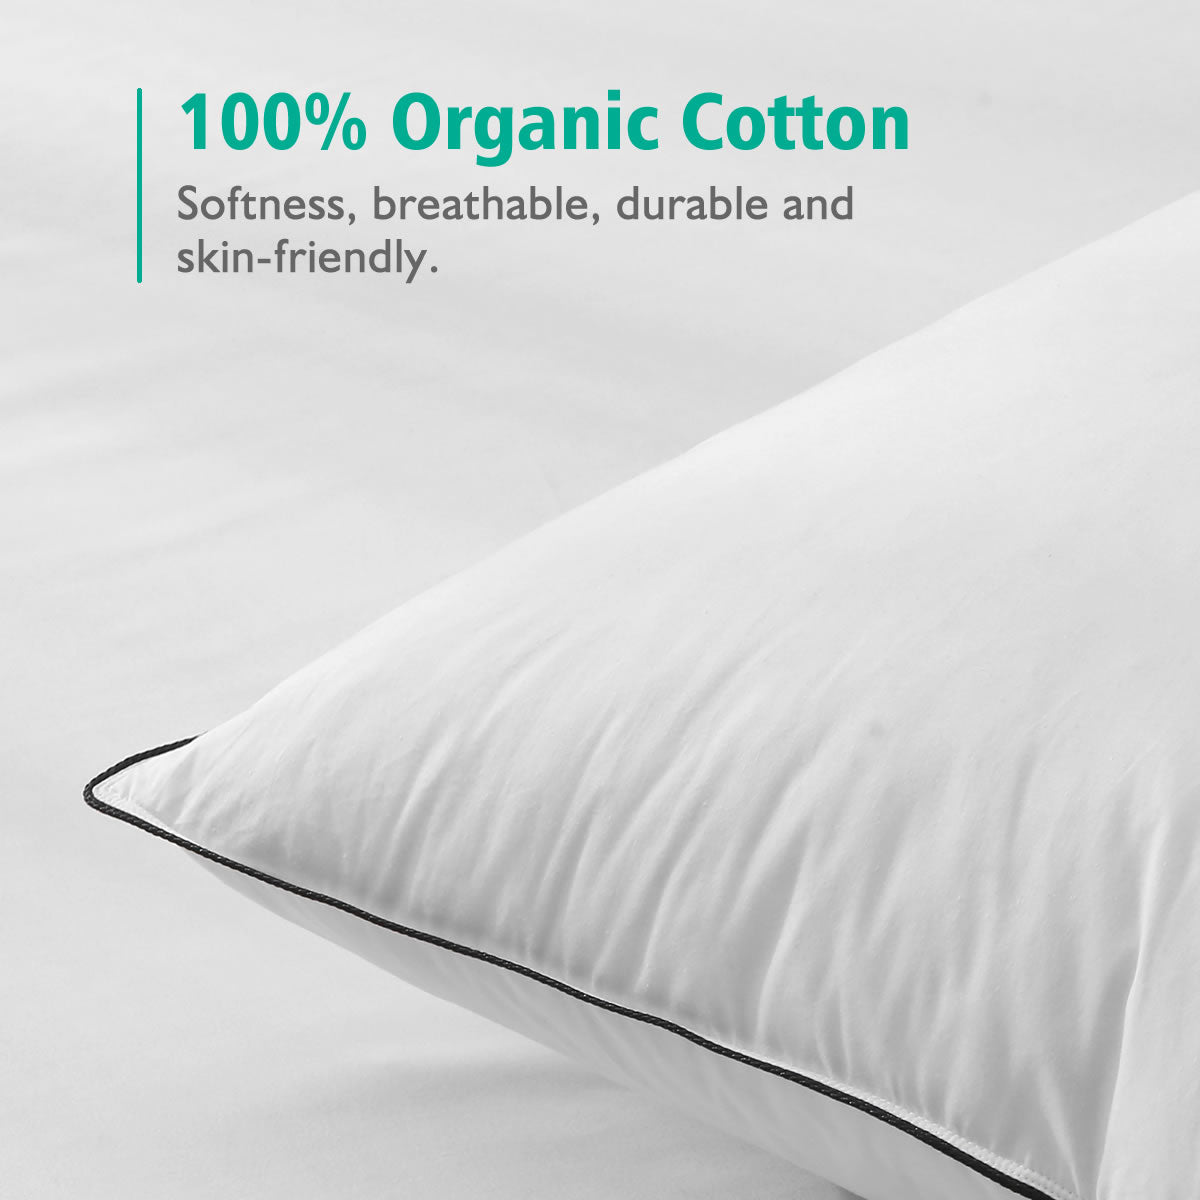 Organic Goose Down Feather Pillows for Sleeping, Soft/Medium Bed Pillow Inserts for Stomach/Back Sleepers